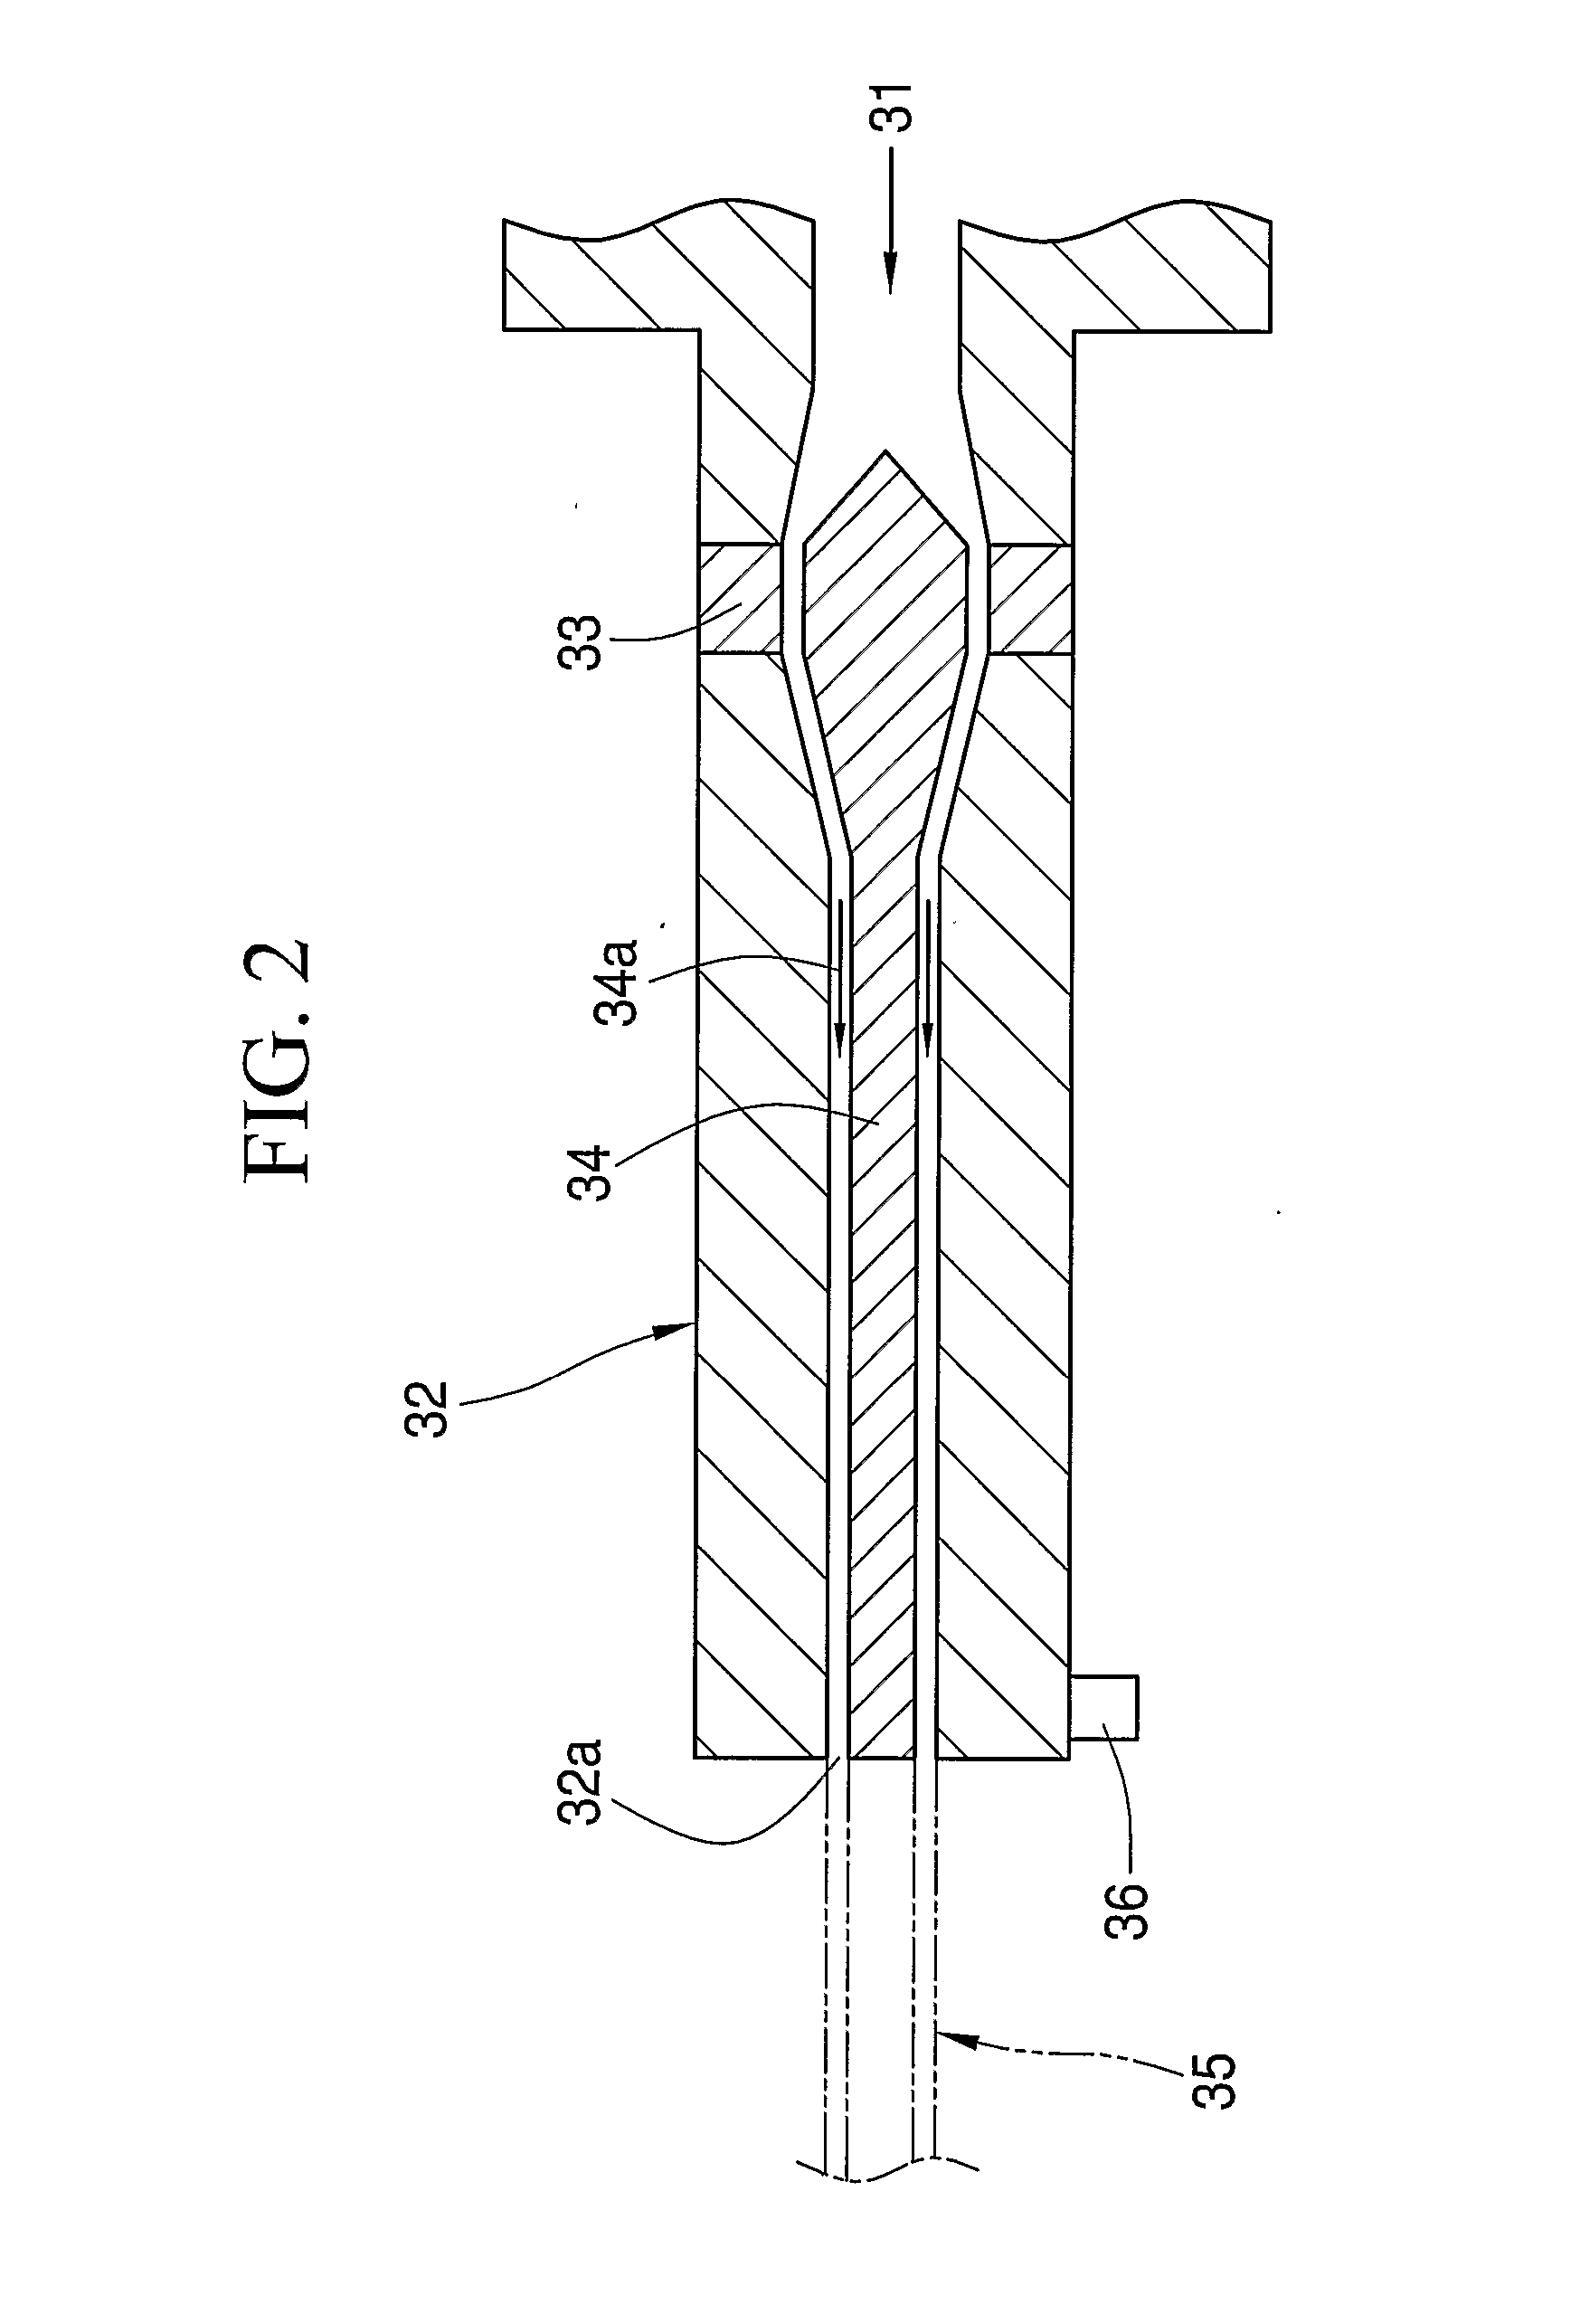 Method and Apparatus for Coating Plastic Optical Fiber with Resin